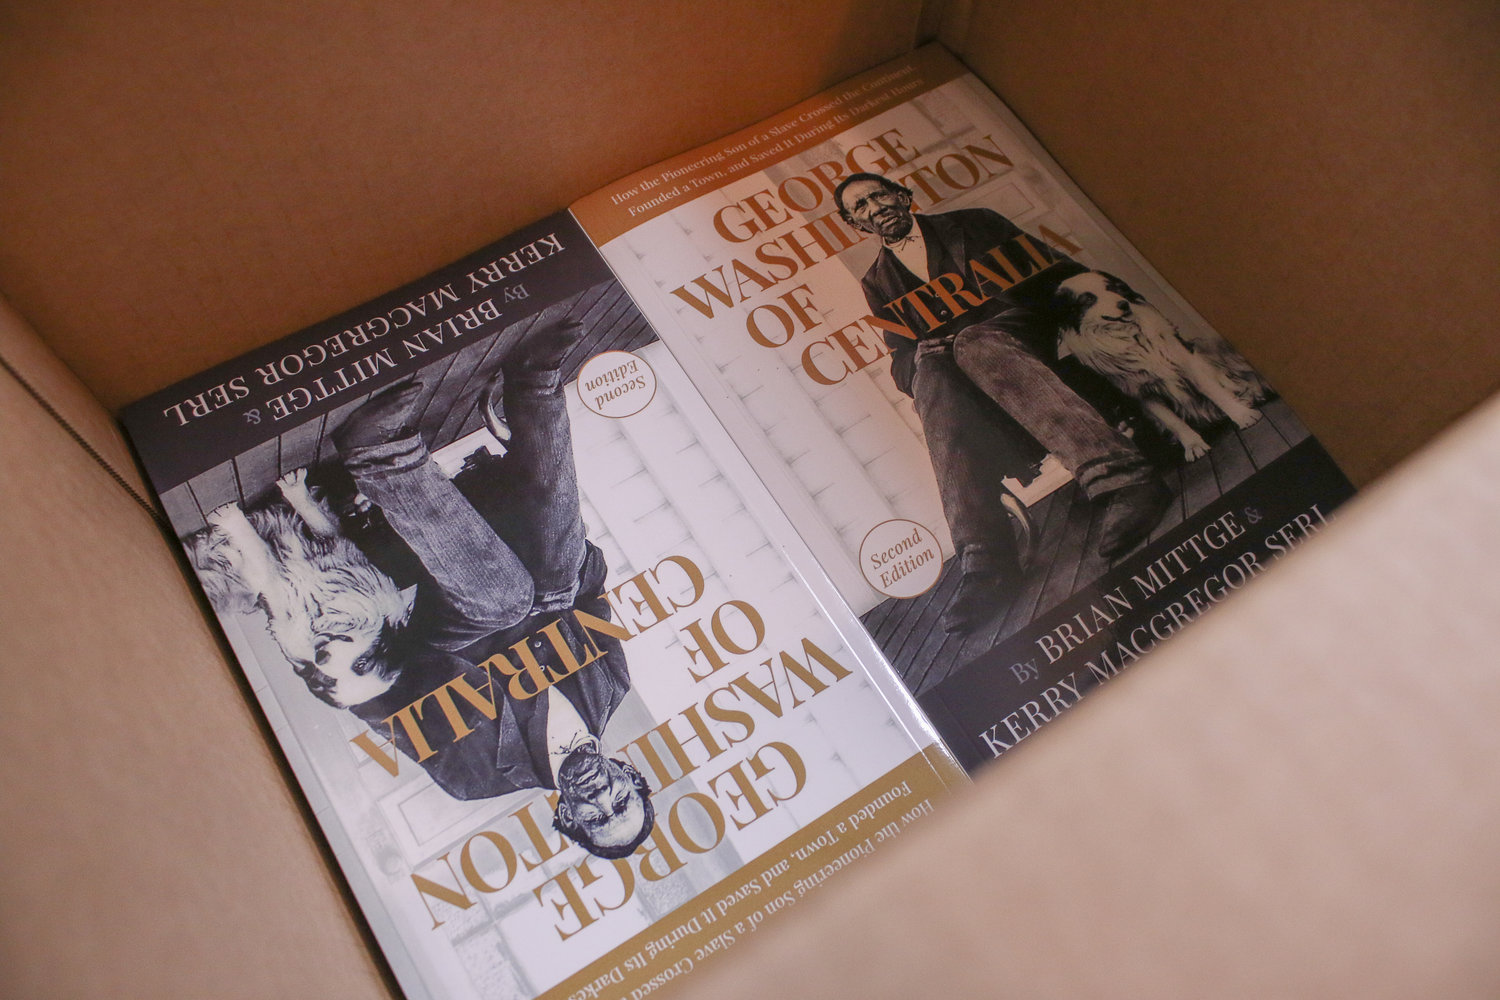 Copies of the second edition of George Washington of Centralia by Brian Mittge and Kerry Serl sit in a box waiting to be dropped off at local book stores.